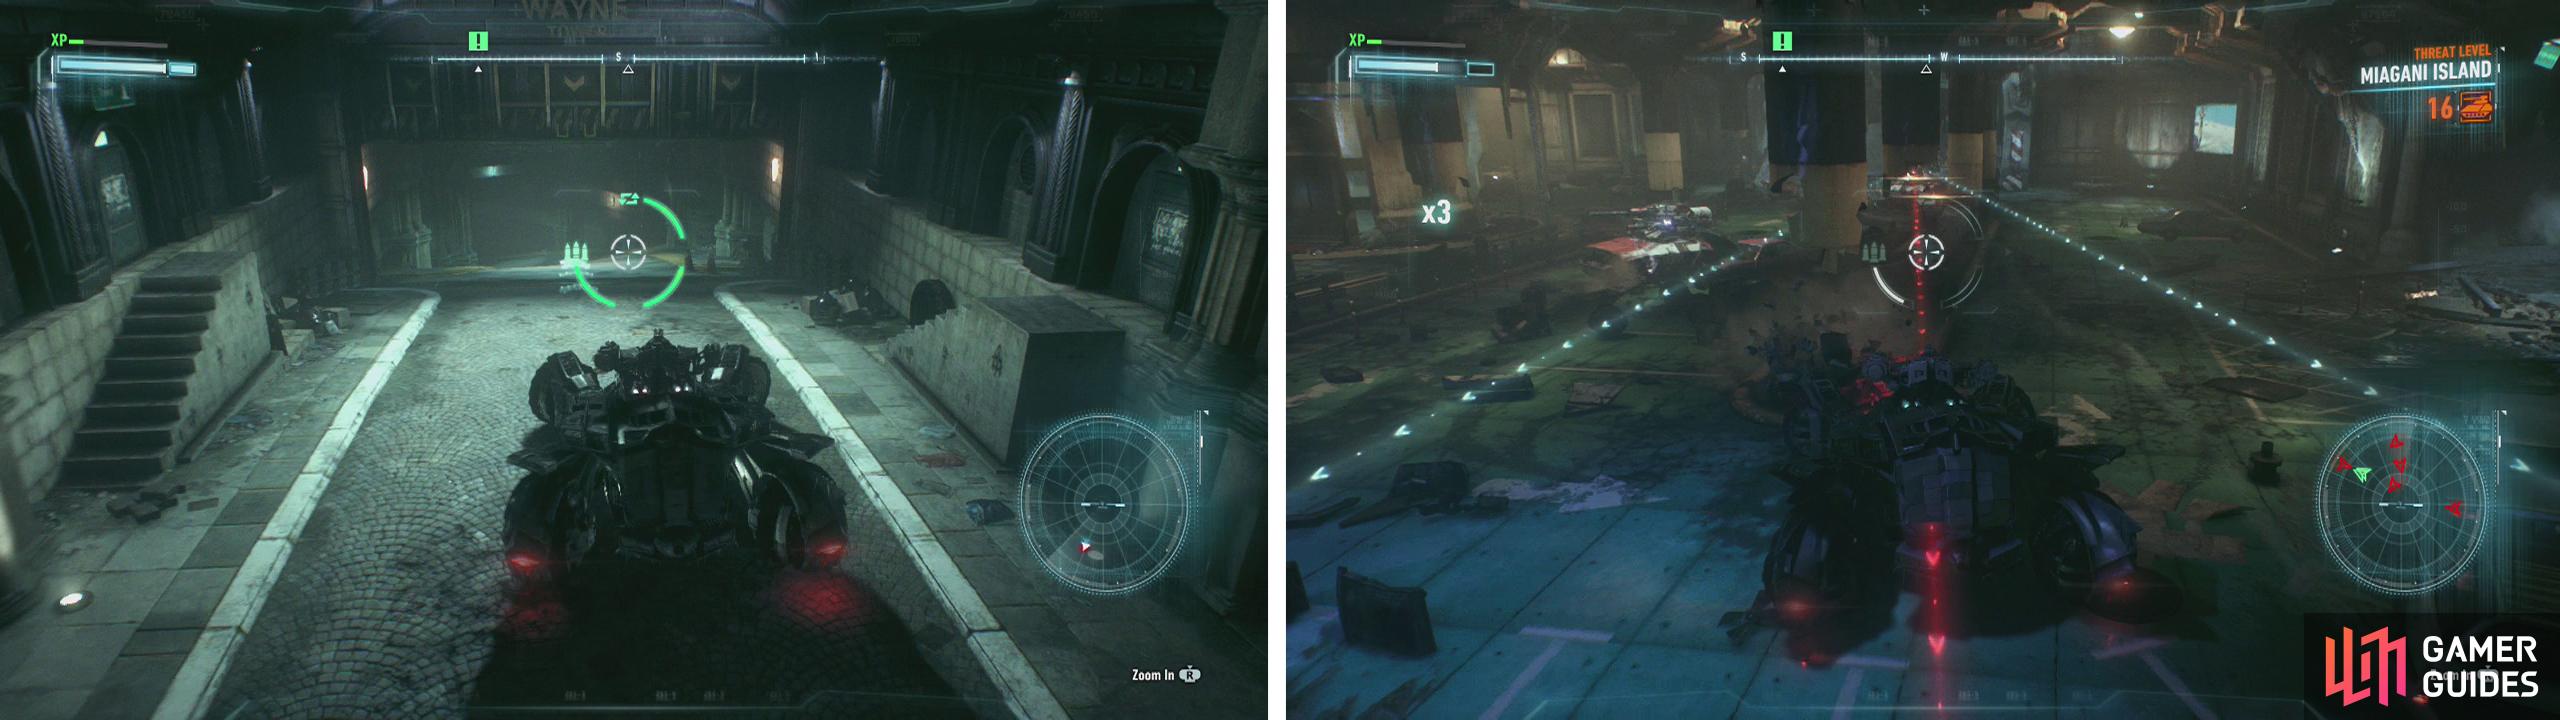 Head into the basement of Wayne Tower (left) for a large-scale Drone Tank battle (right).